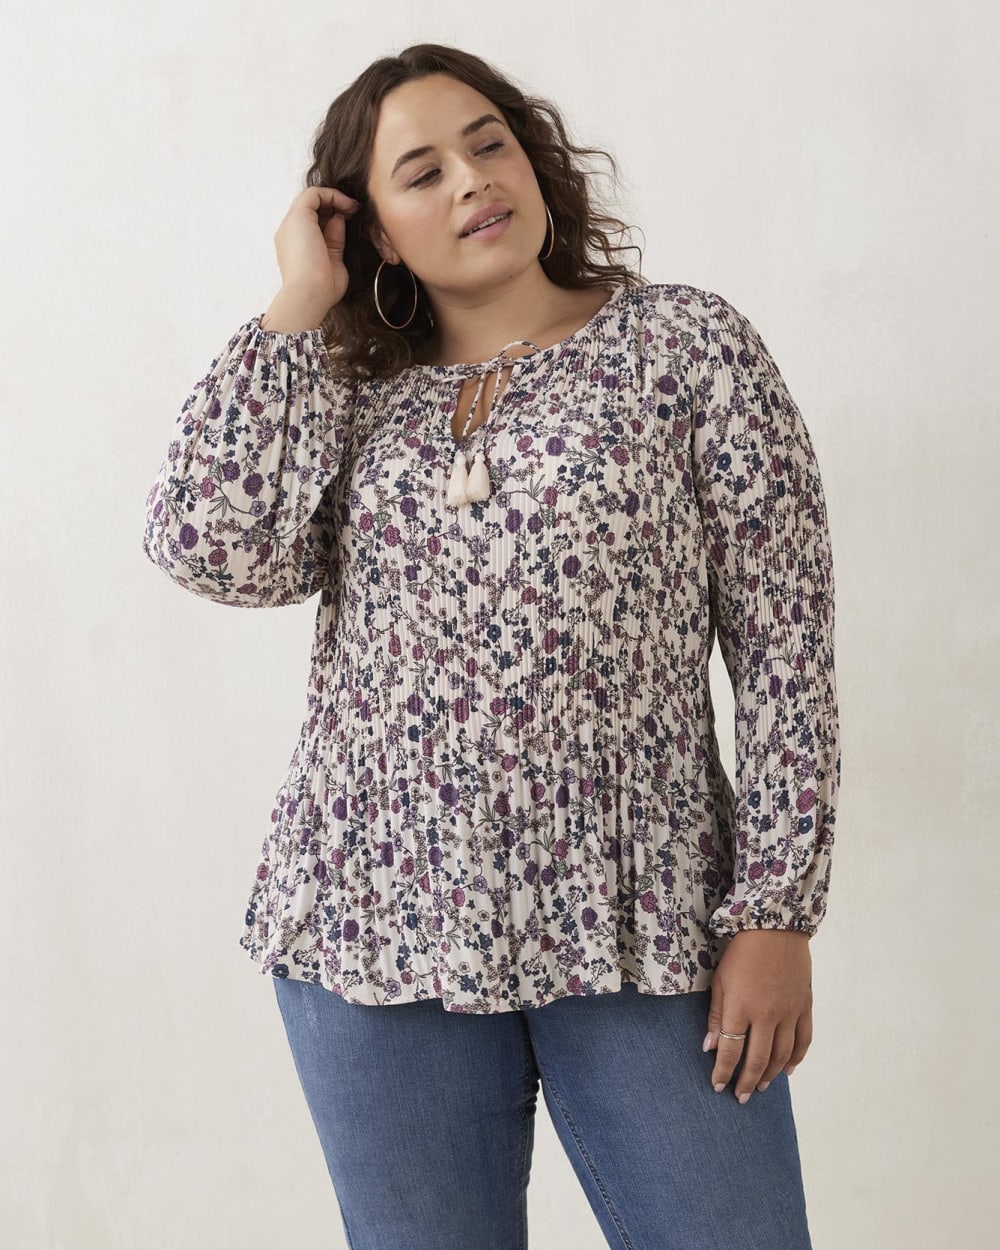 Responsible, Pleat and Release Printed Long-Sleeve Blouse | Penningtons